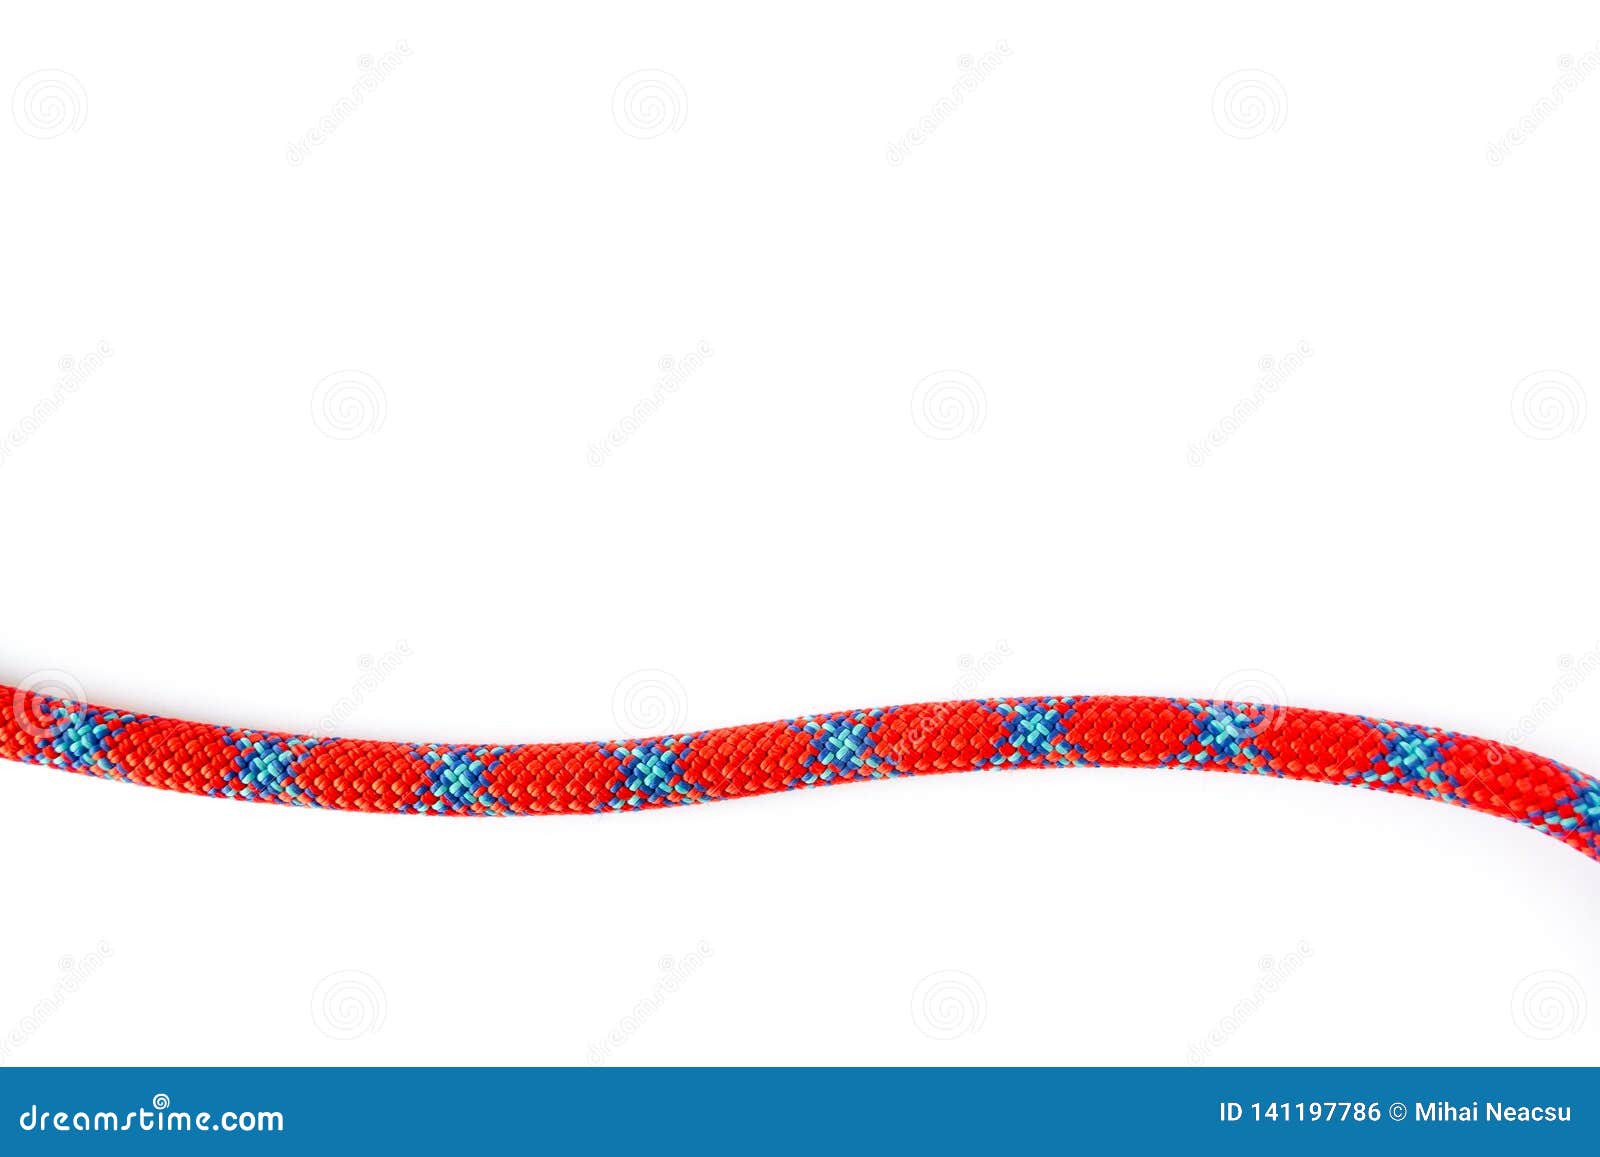 https://thumbs.dreamstime.com/z/mm-climbing-rope-strand-isolated-white-background-string-mountaineering-coil-red-blue-abstract-pattern-space-141197786.jpg